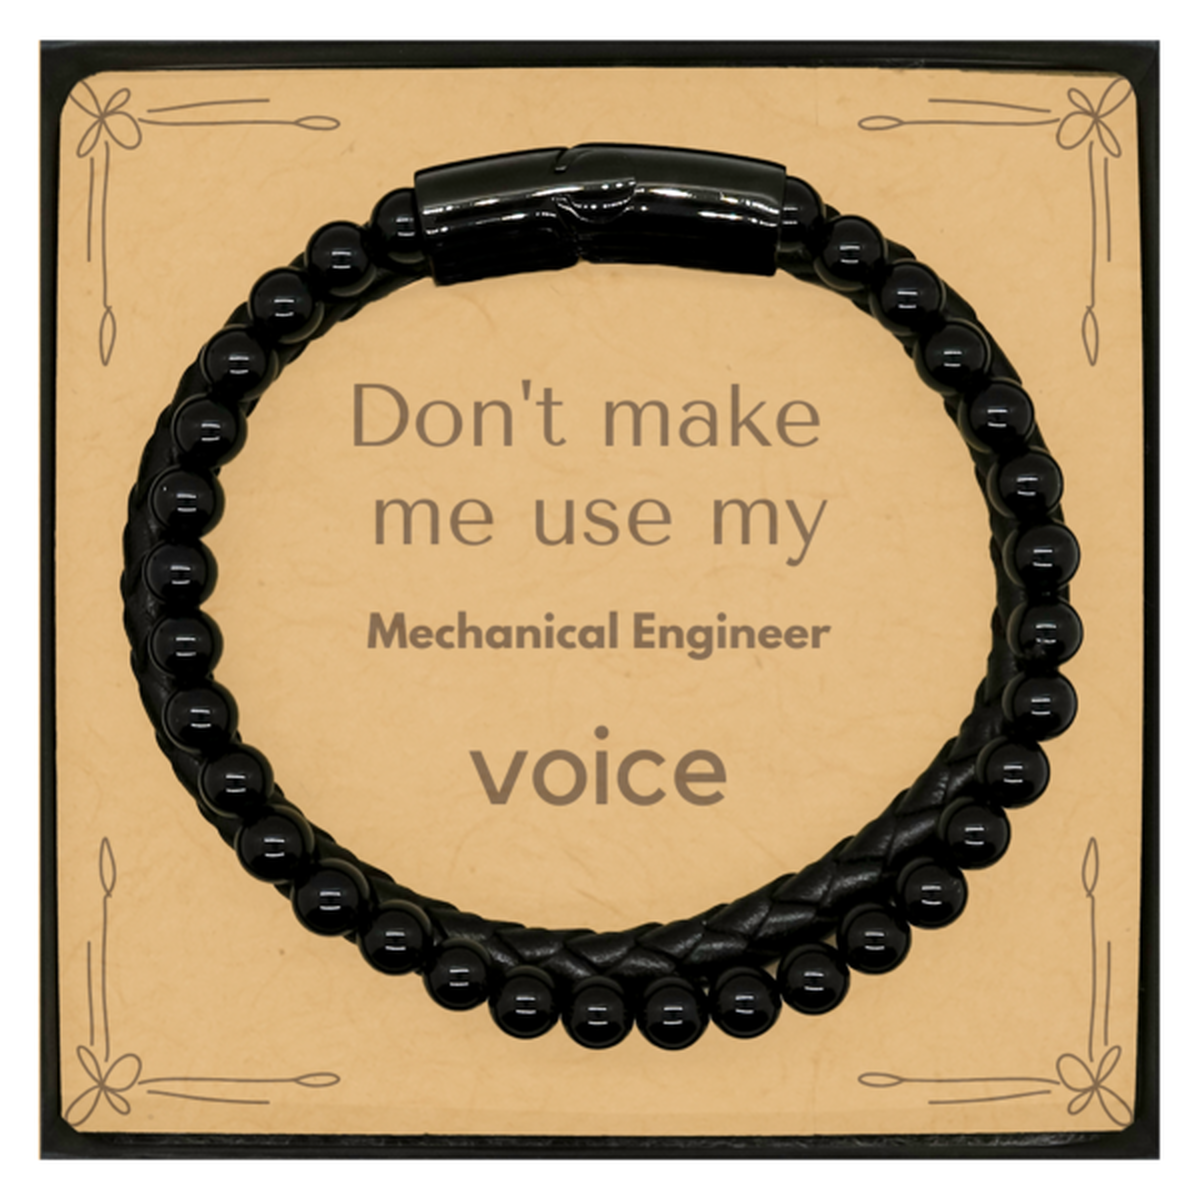 Don't make me use my Mechanical Engineer voice, Sarcasm Mechanical Engineer Card Gifts, Christmas Mechanical Engineer Stone Leather Bracelets Birthday Unique Gifts For Mechanical Engineer Coworkers, Men, Women, Colleague, Friends